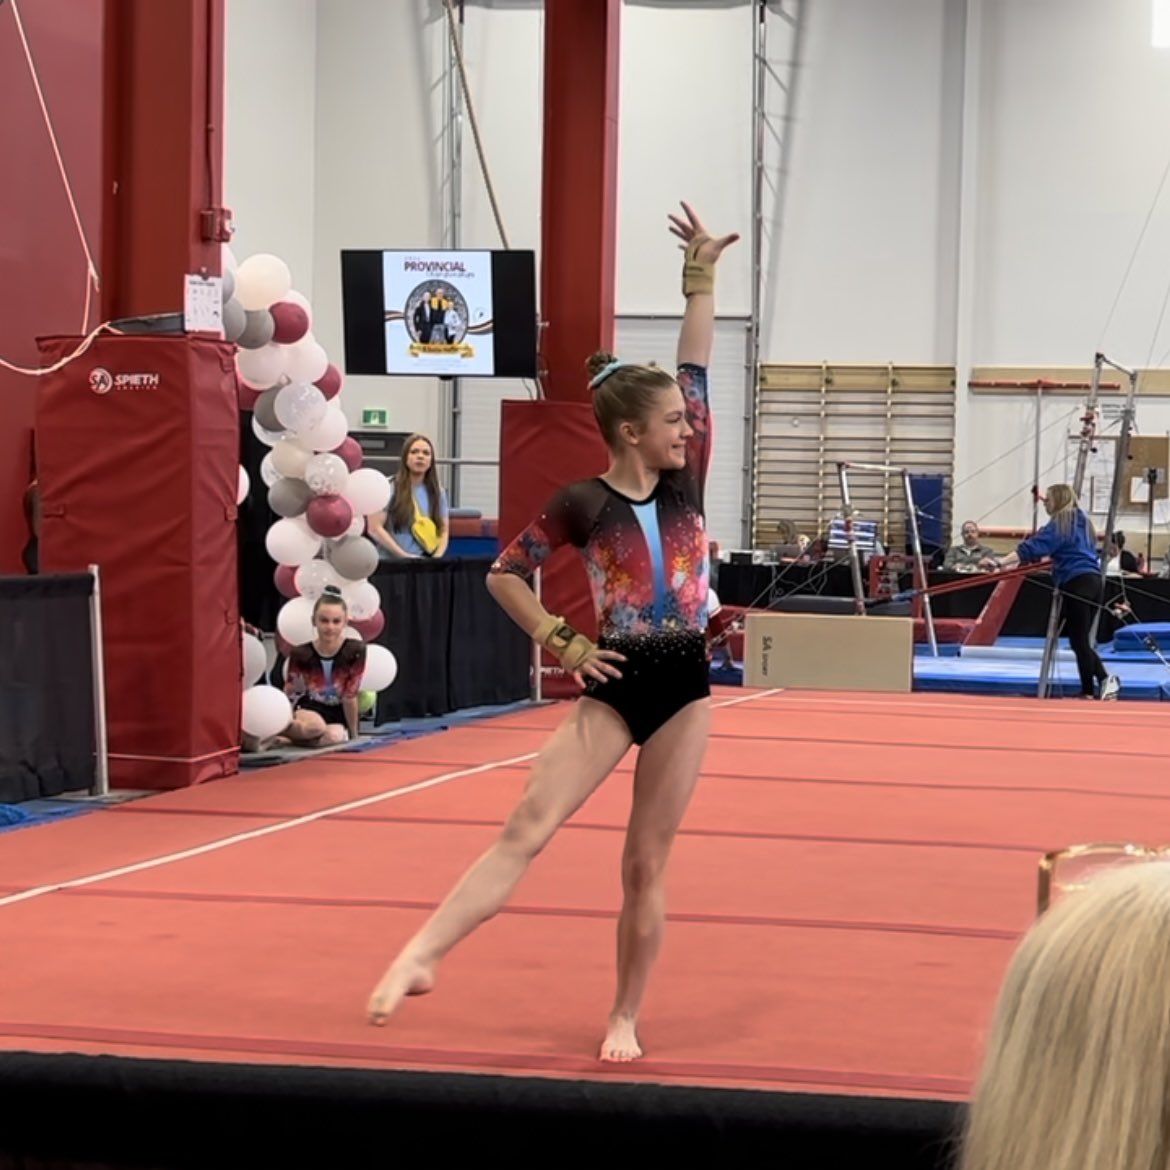 Lindsay finished 2nd all around in the NL Gymnastics Provincials held this weekend, for the level 6 age 13+ category! This earned her a spot on the level 6 novice team, to represent NL at the Atlantic Championships in Halifax in 2 weeks. Way to go, Linds! @BrooksideInt #Cygnus